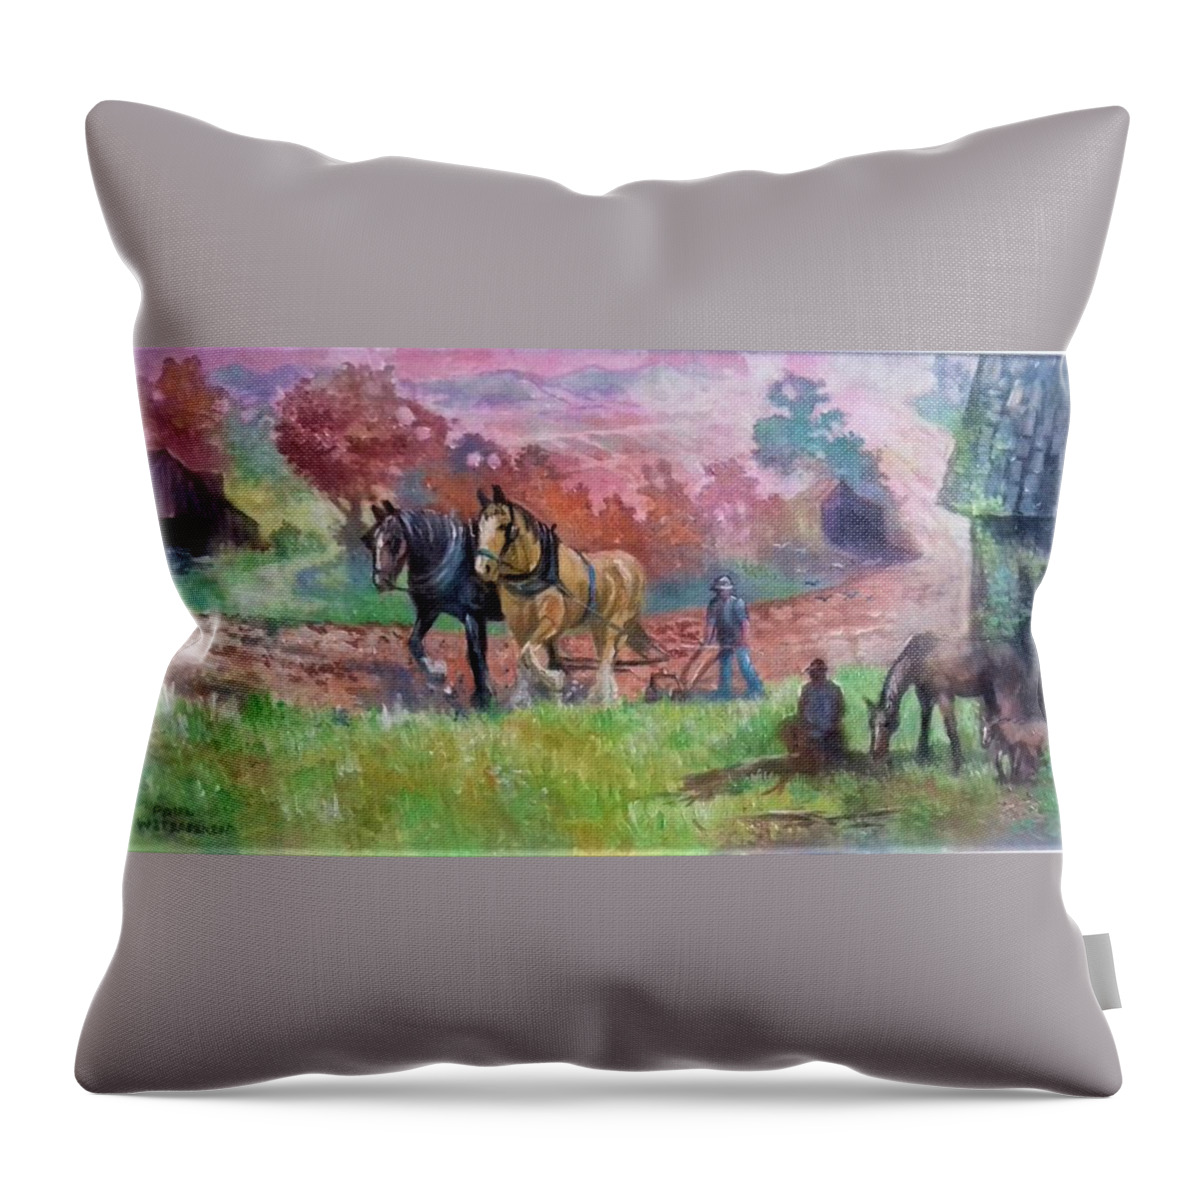 Horses Throw Pillow featuring the painting Ploughing by Paul Weerasekera